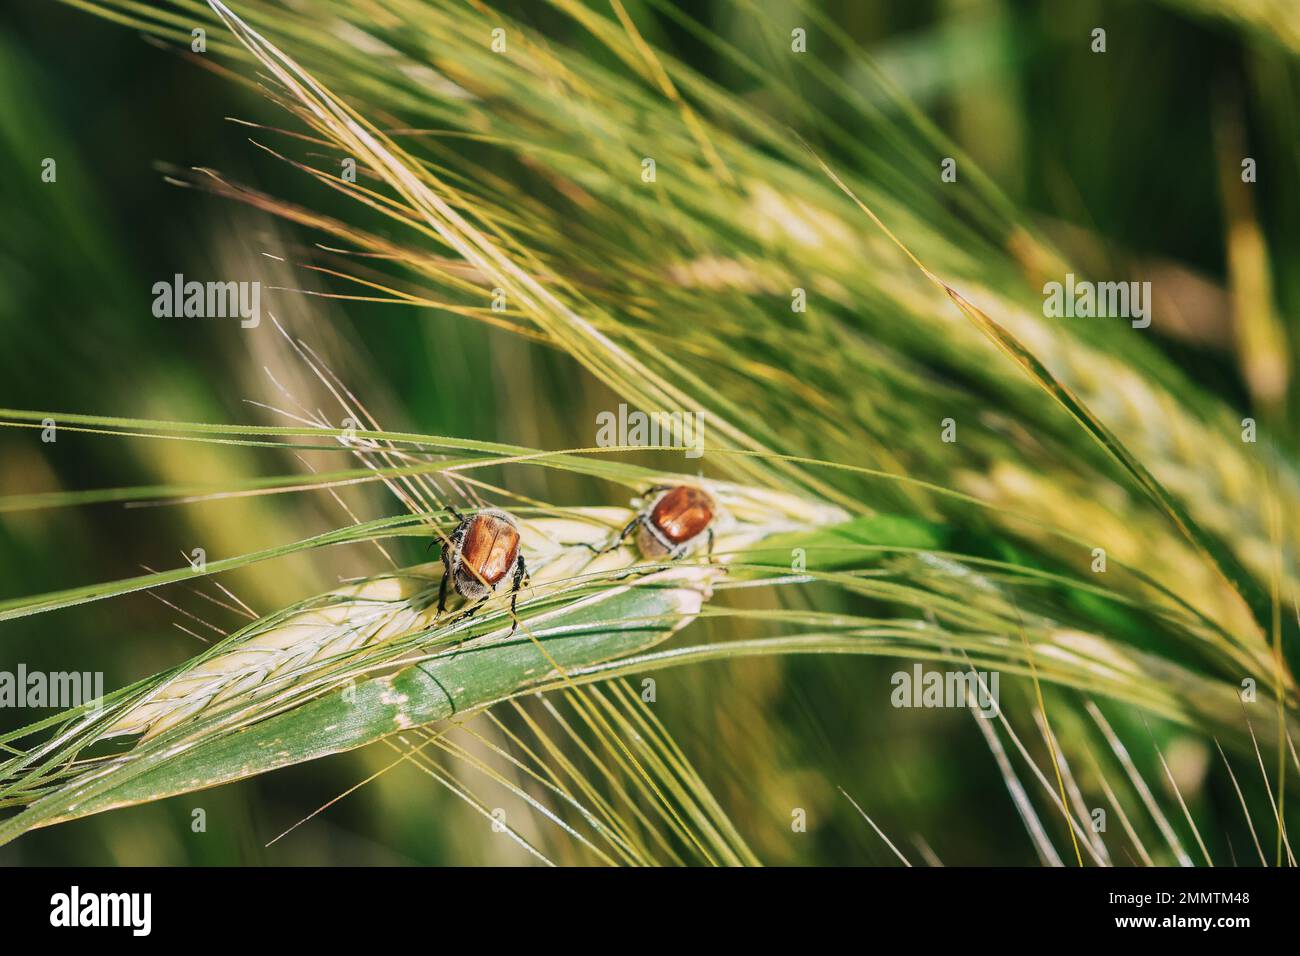 Insects Pest Of Agricultural Crops Grain Beetles On Wheat Ear On Background Of Wheat Field. Bread Beetle, Or Kuzka Anisoplia Austriaca Is Beetle Of Stock Photo